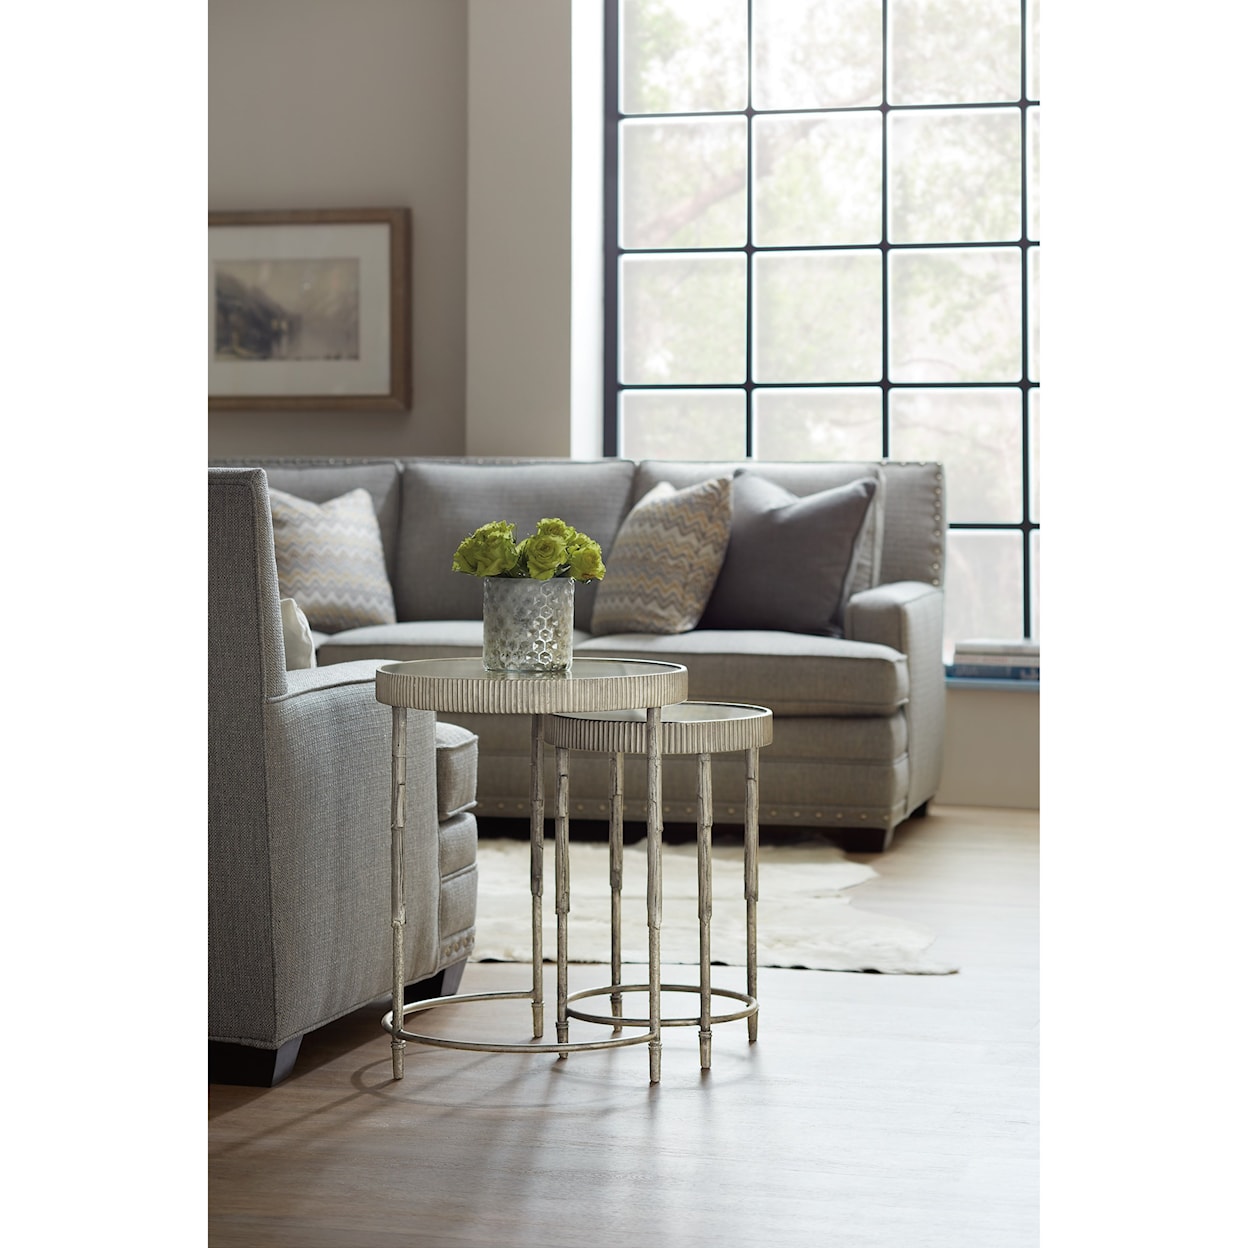 Hooker Furniture 5594-50 Accent Nesting Tables